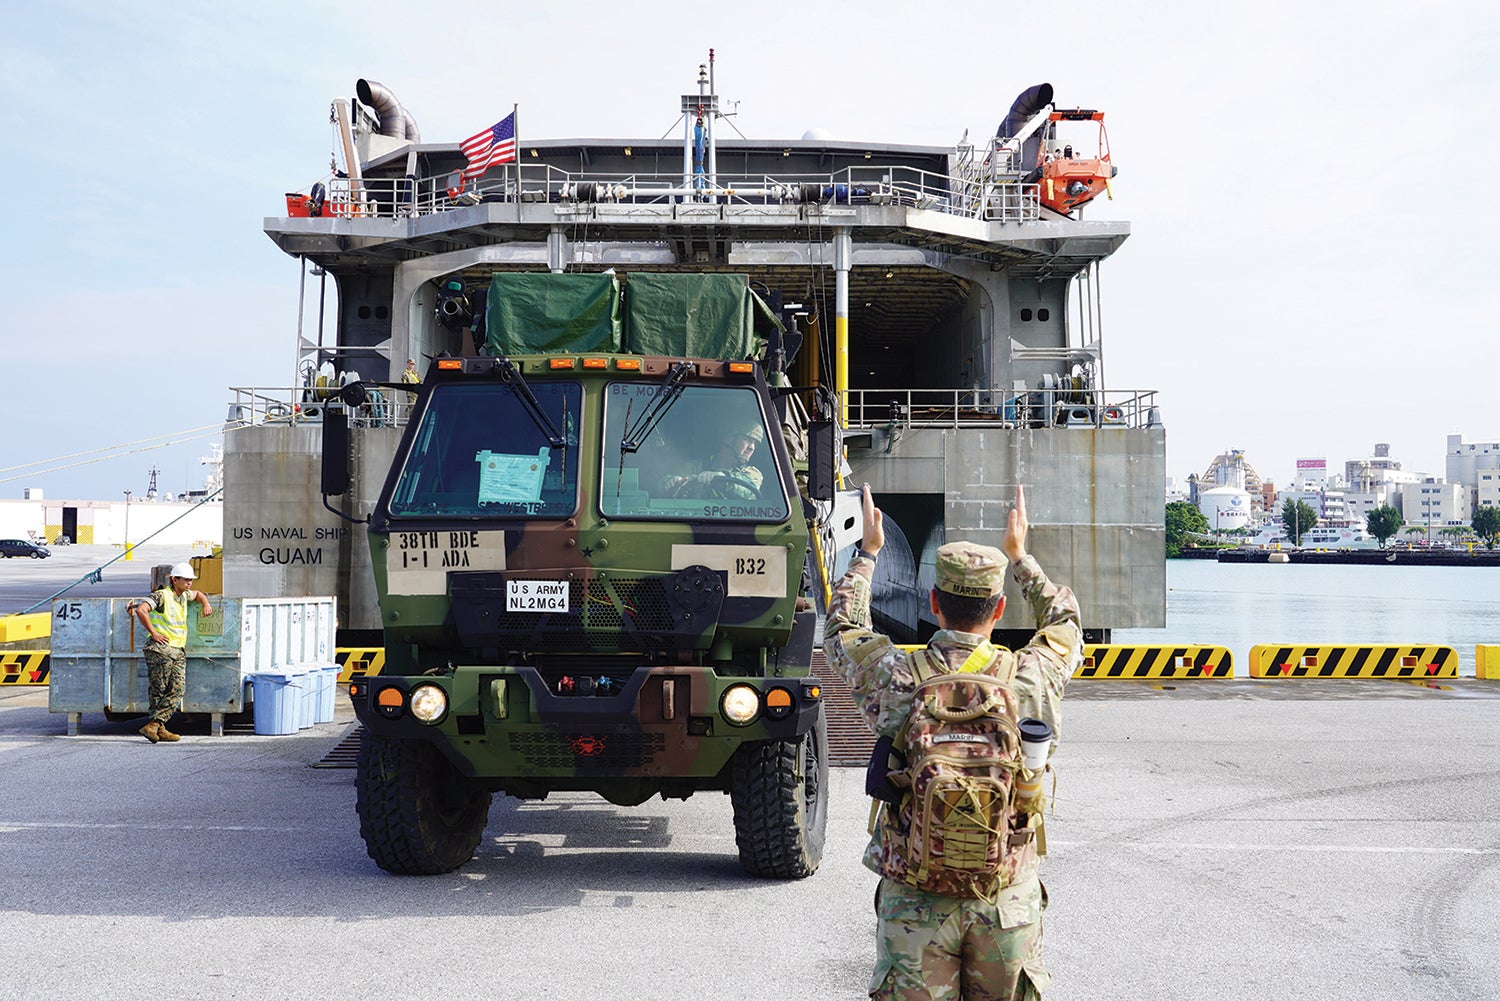 A soldier guides a mobile command center onto a ship at Naha Military Port, Okinawa, Japan. (Credit: U.S. Army/Staff Sgt. Christopher Schmiett)